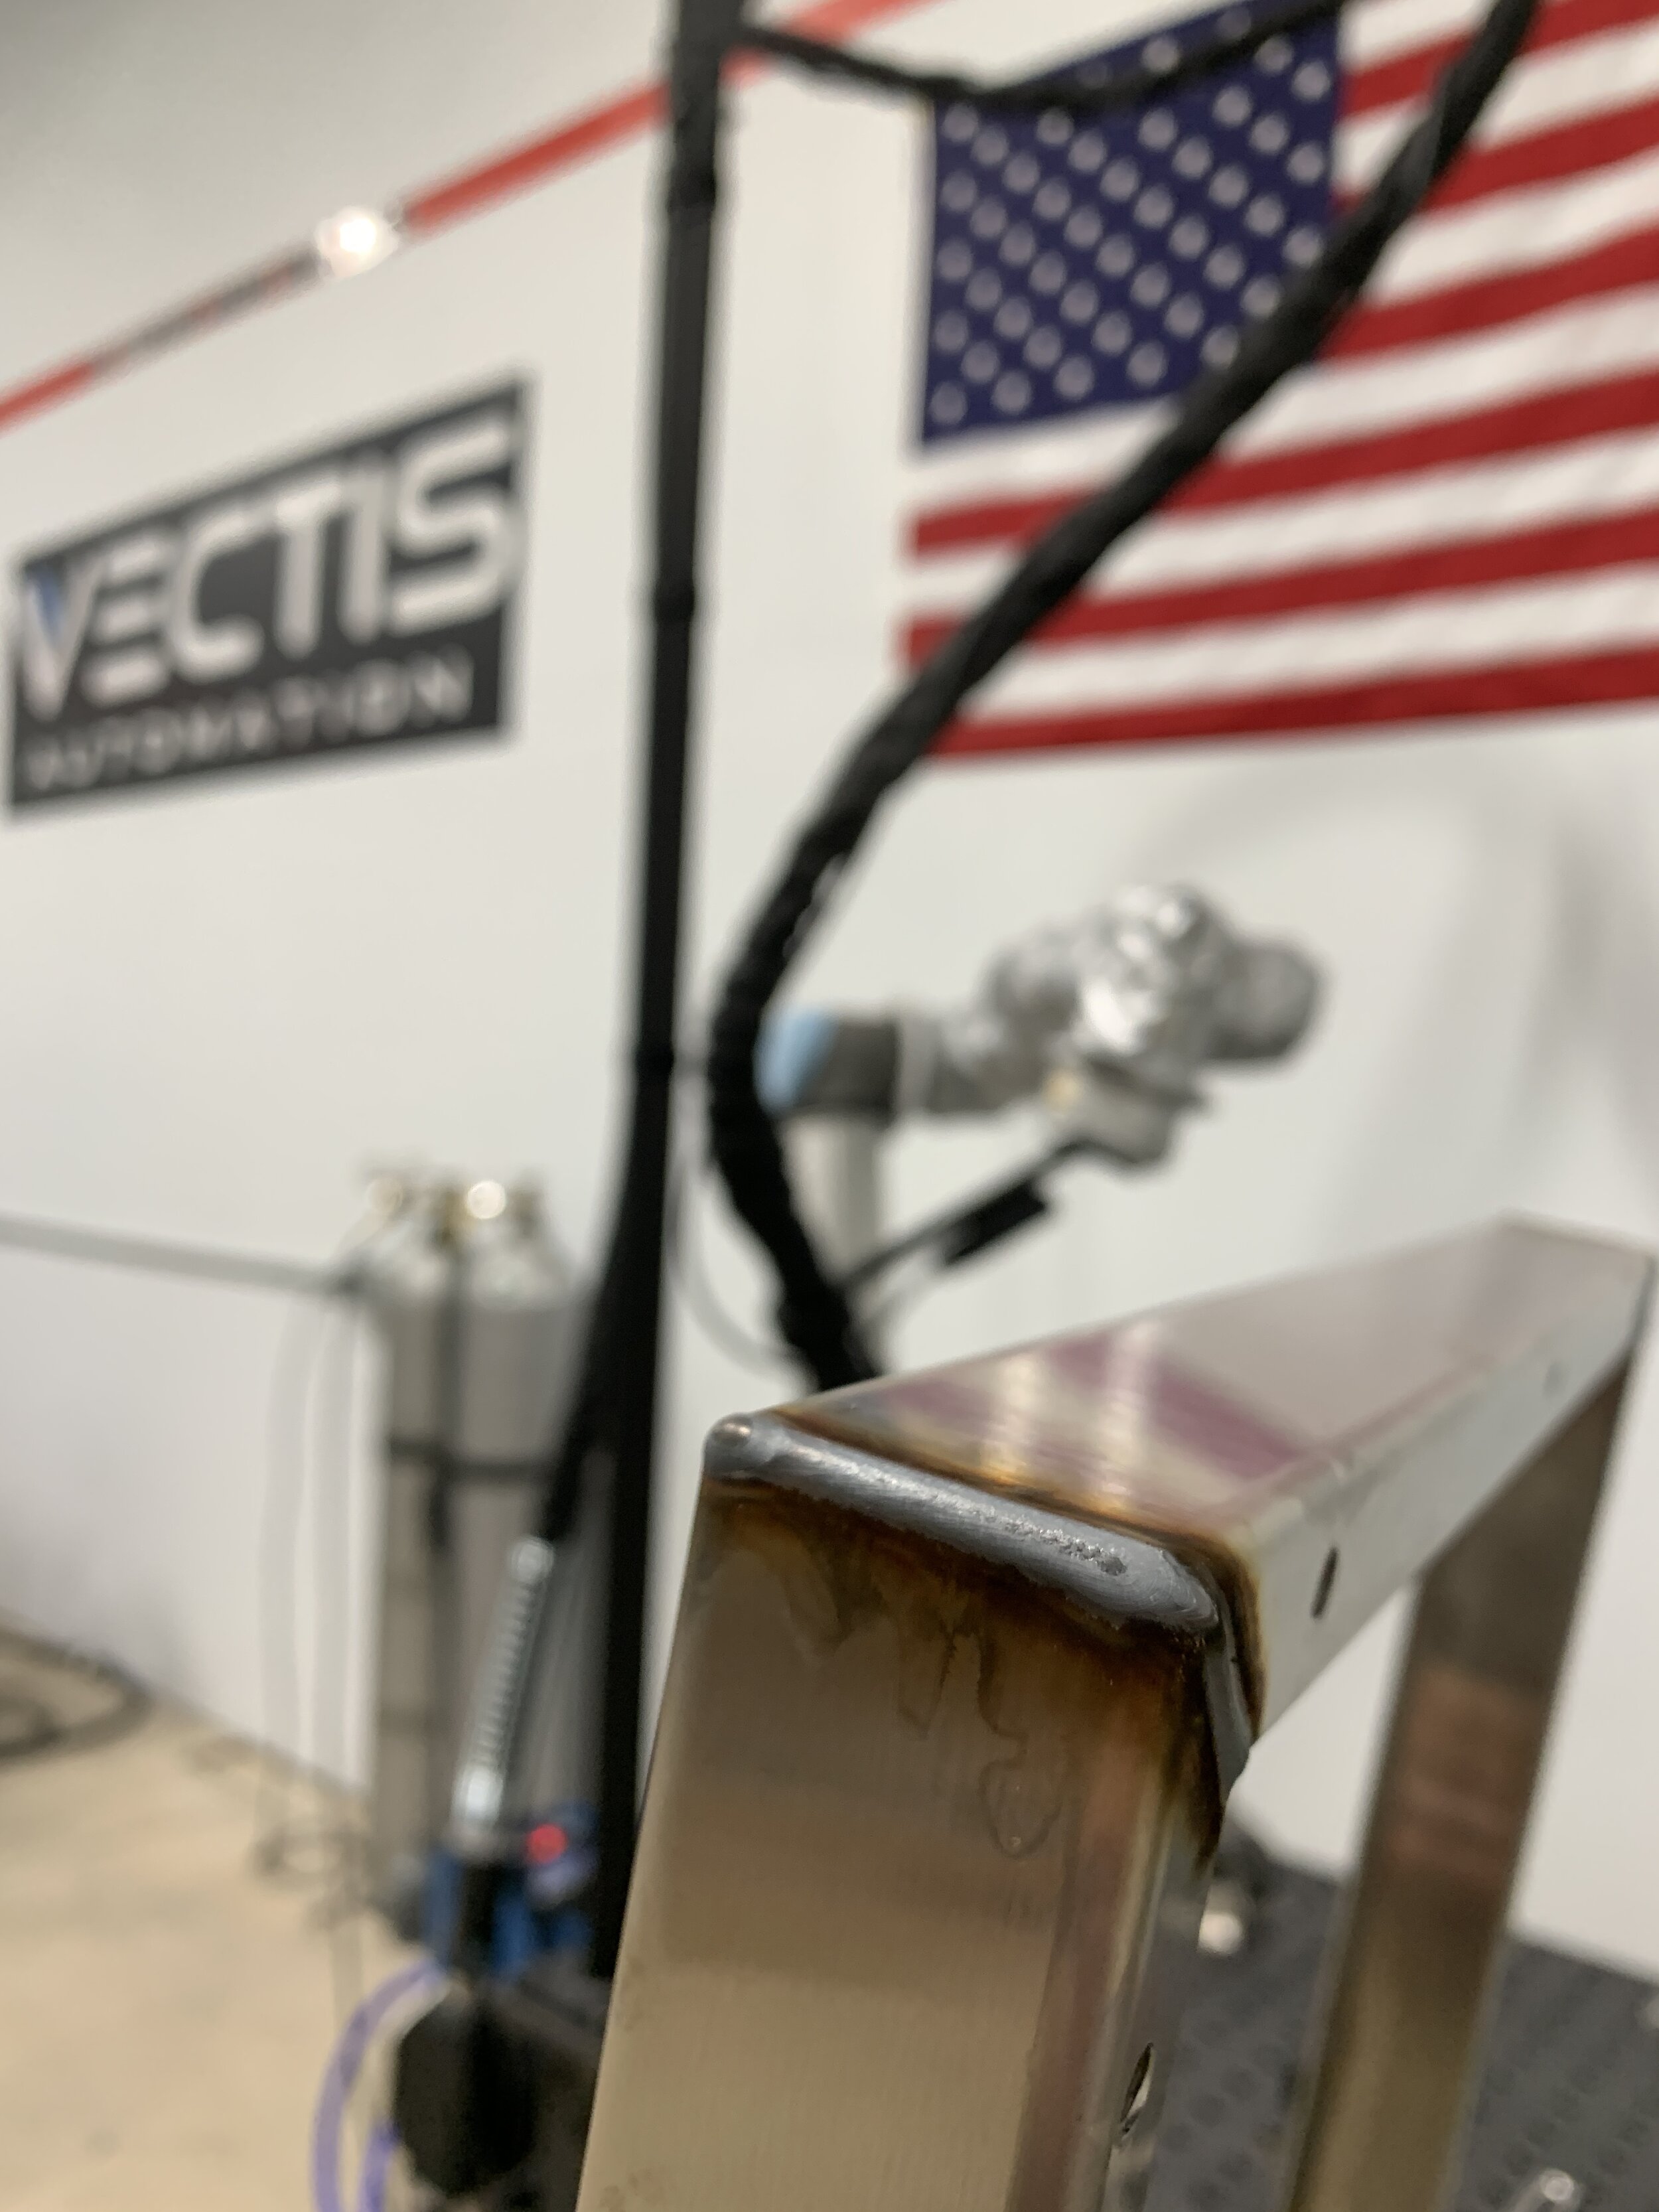 Vectis Automation Cobot Welding  in action - stainless